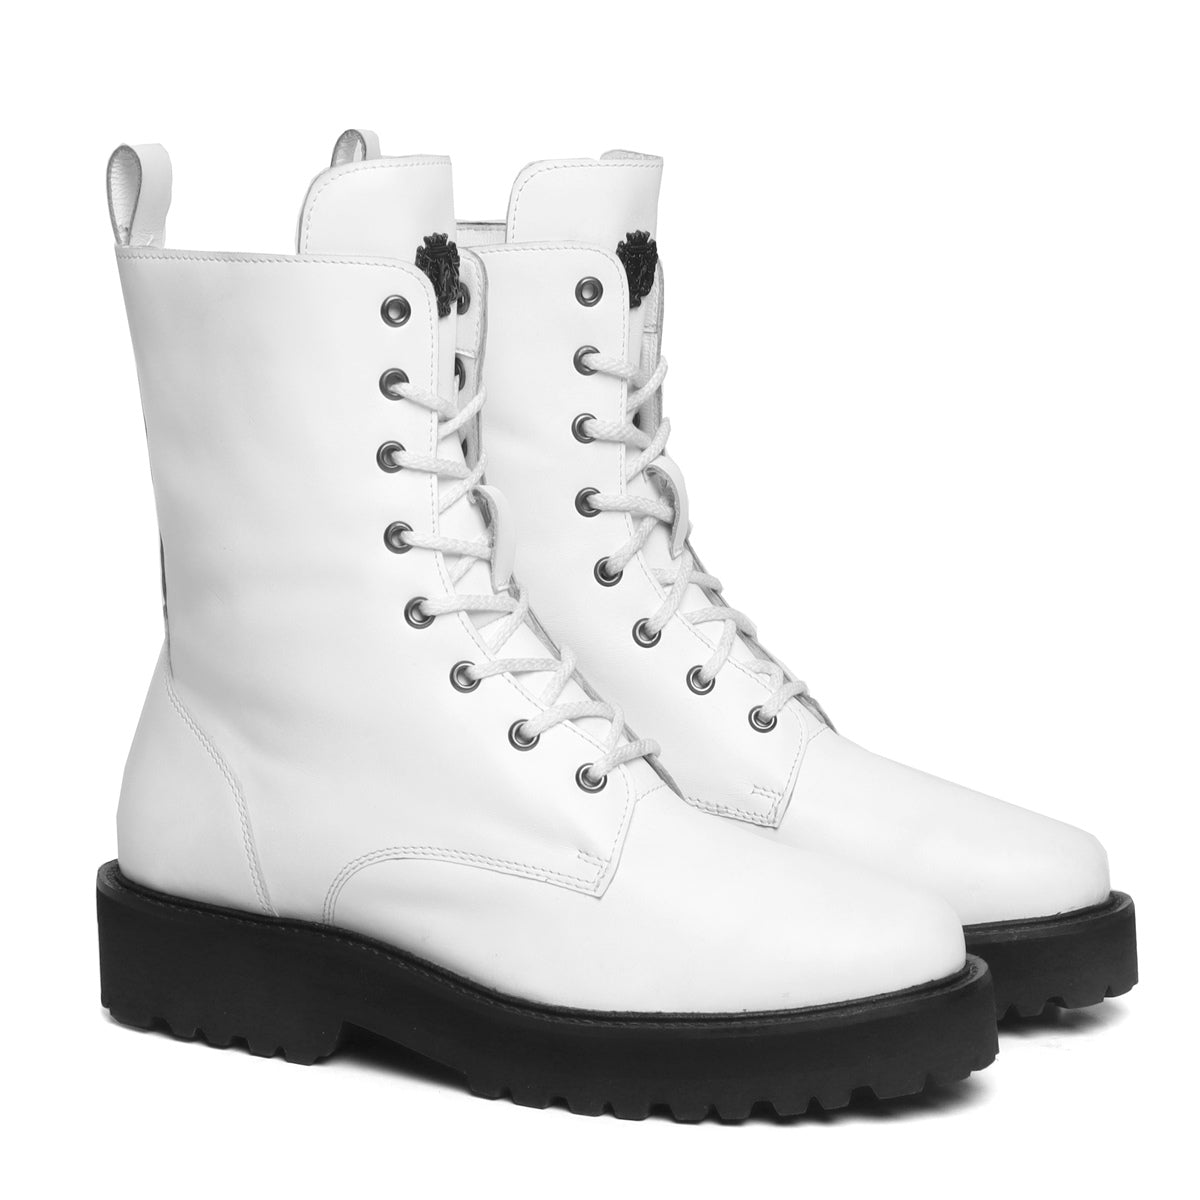 Lightweight Boot For Women White Leather With Contrasting Black Sole By Brune & Bareskin